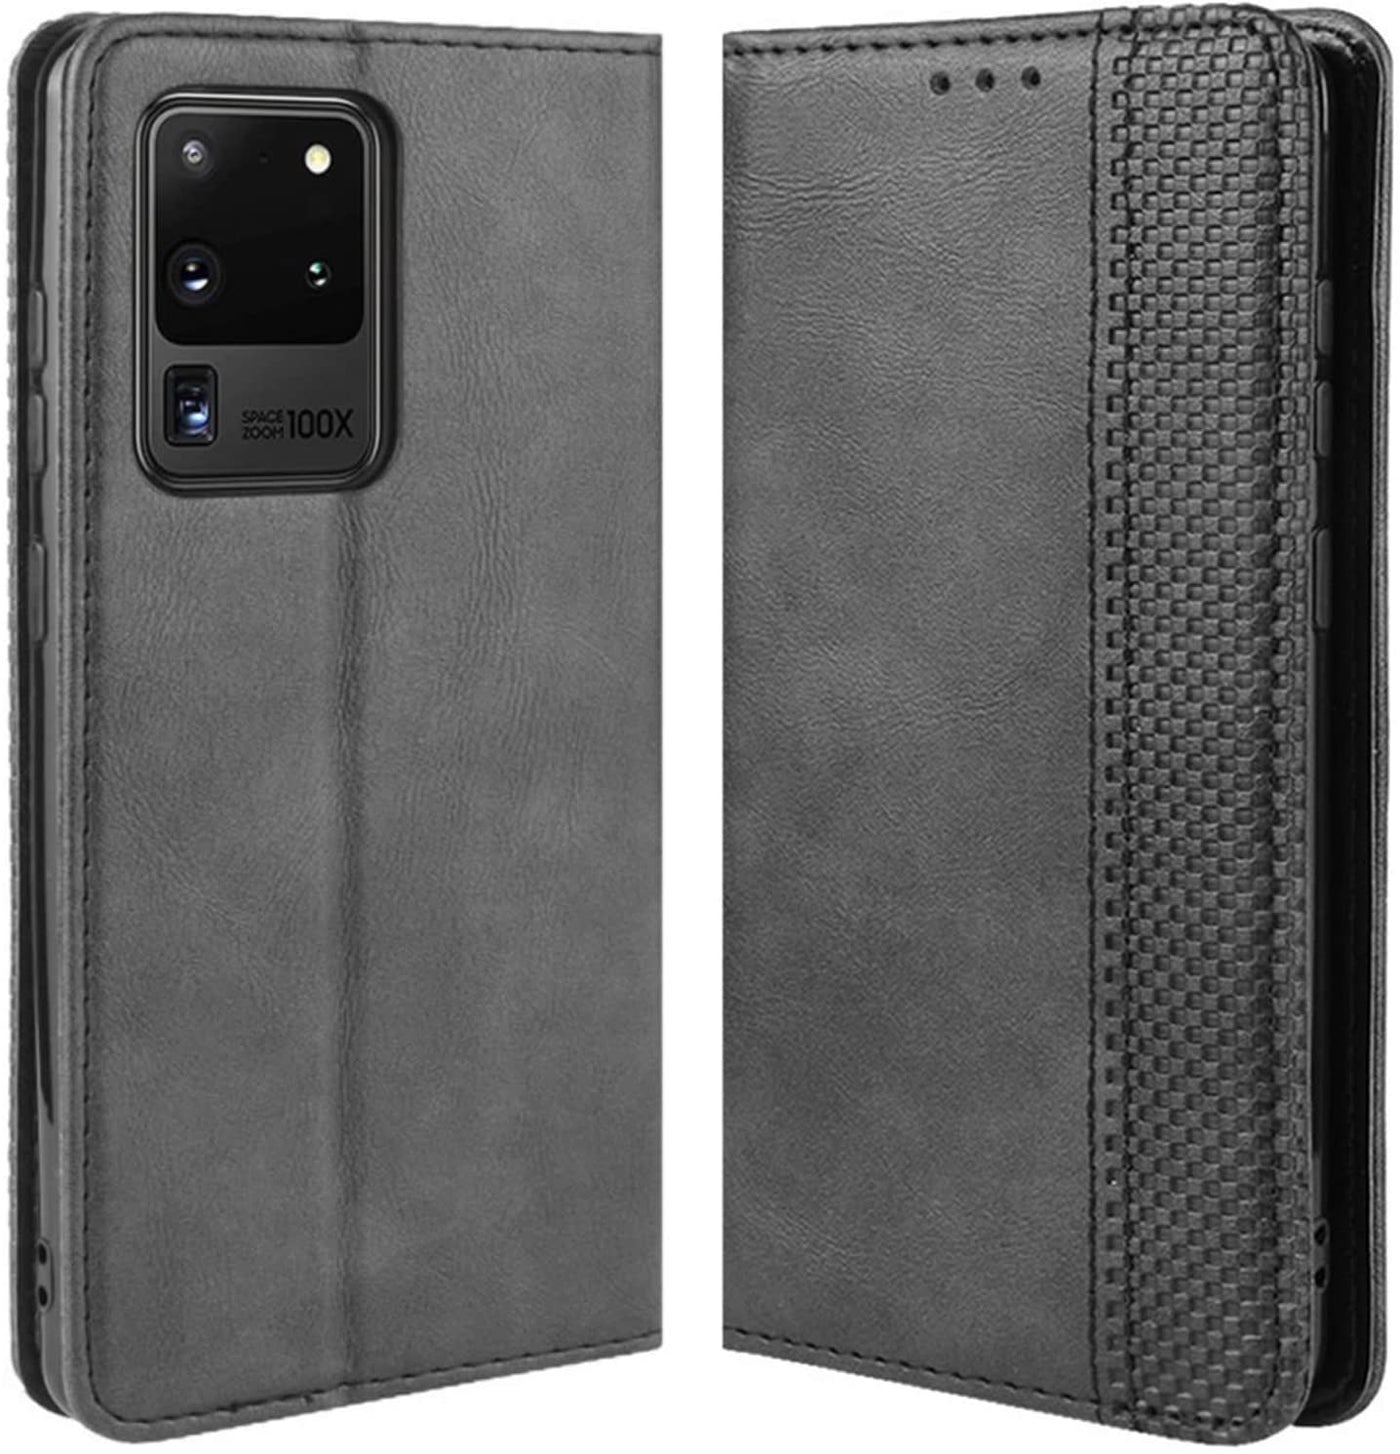 Samsung Galaxy S20 Ultra black color leather wallet flip cover case By excelsior